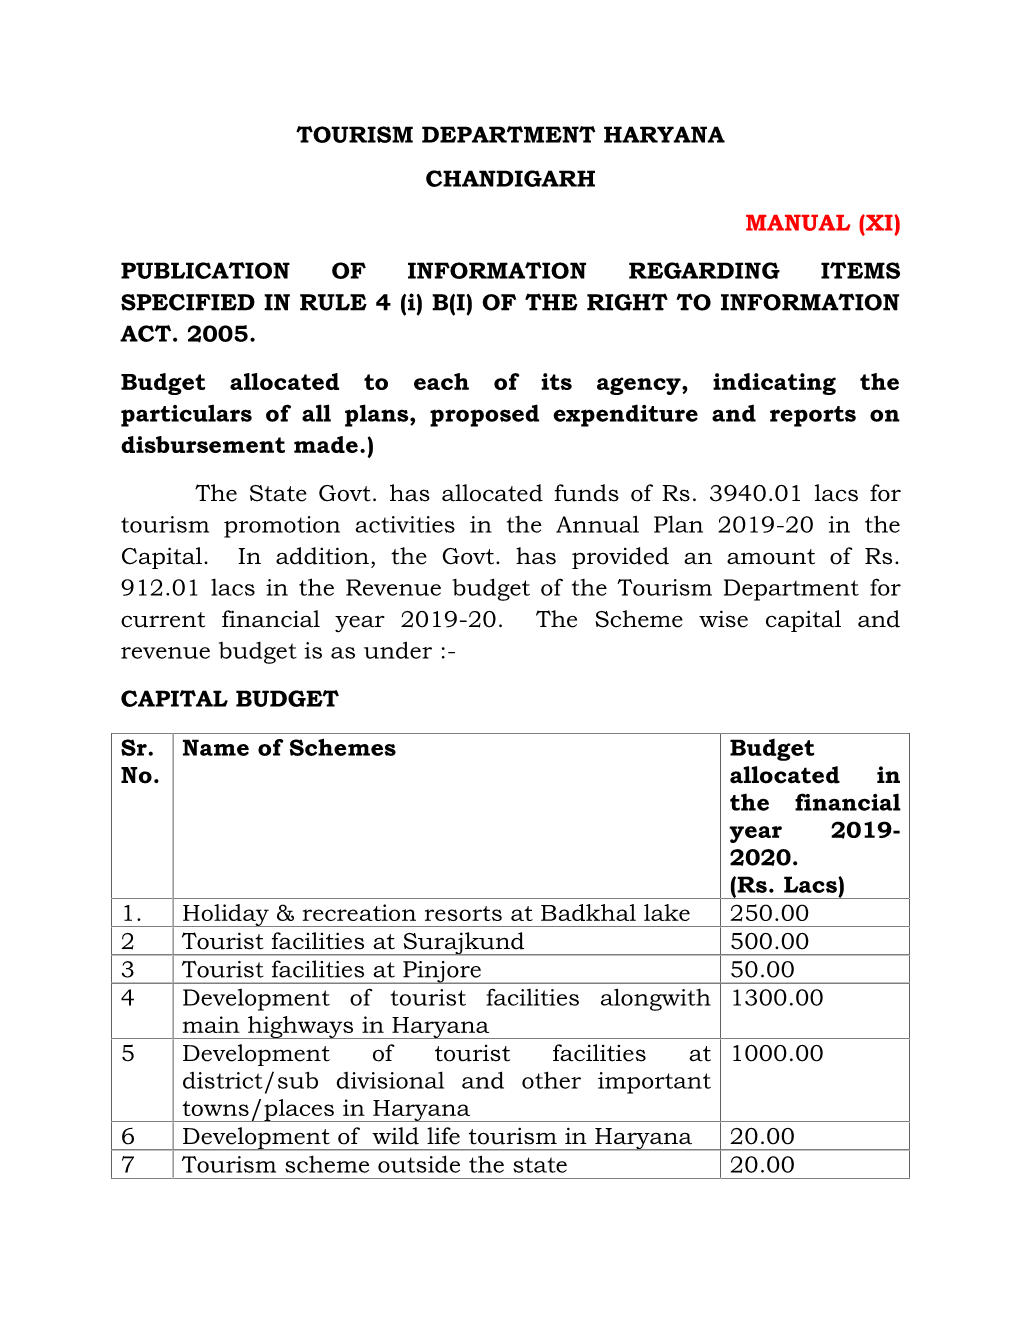 TOURISM DEPARTMENT HARYANA CHANDIGARH MANUAL (XI) PUBLICATION of INFORMATION REGARDING ITEMS SPECIFIED in RULE 4 (I) B(I) OF